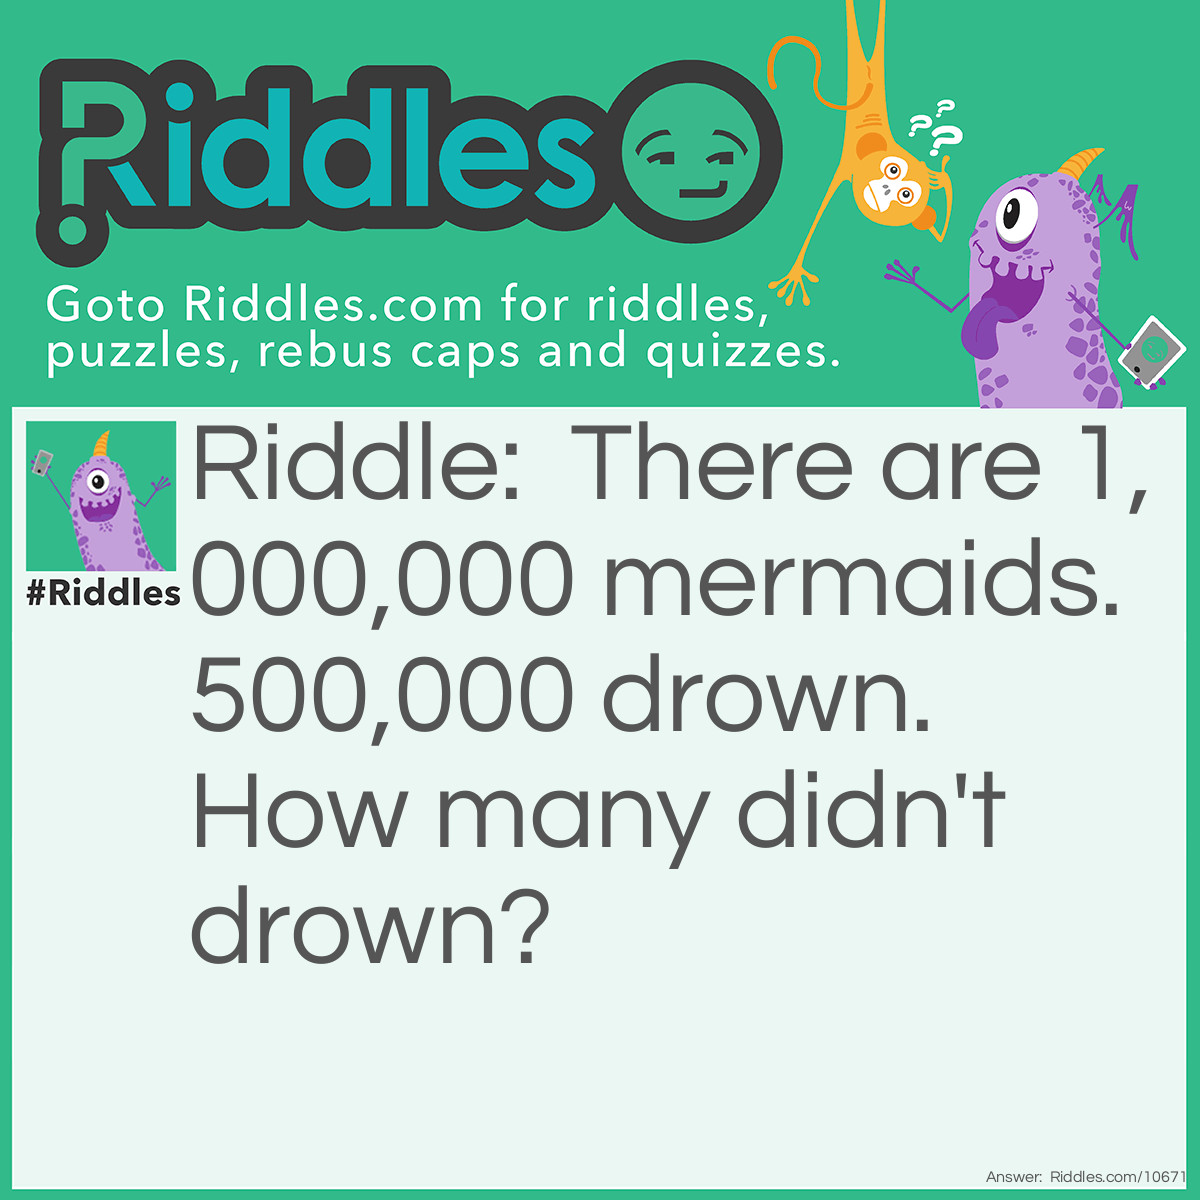 Riddle: There are 1,000,000 mermaids. 500,000 drown. How many didn't drown? Answer: 1,000,000. Mermaids can’t drown!